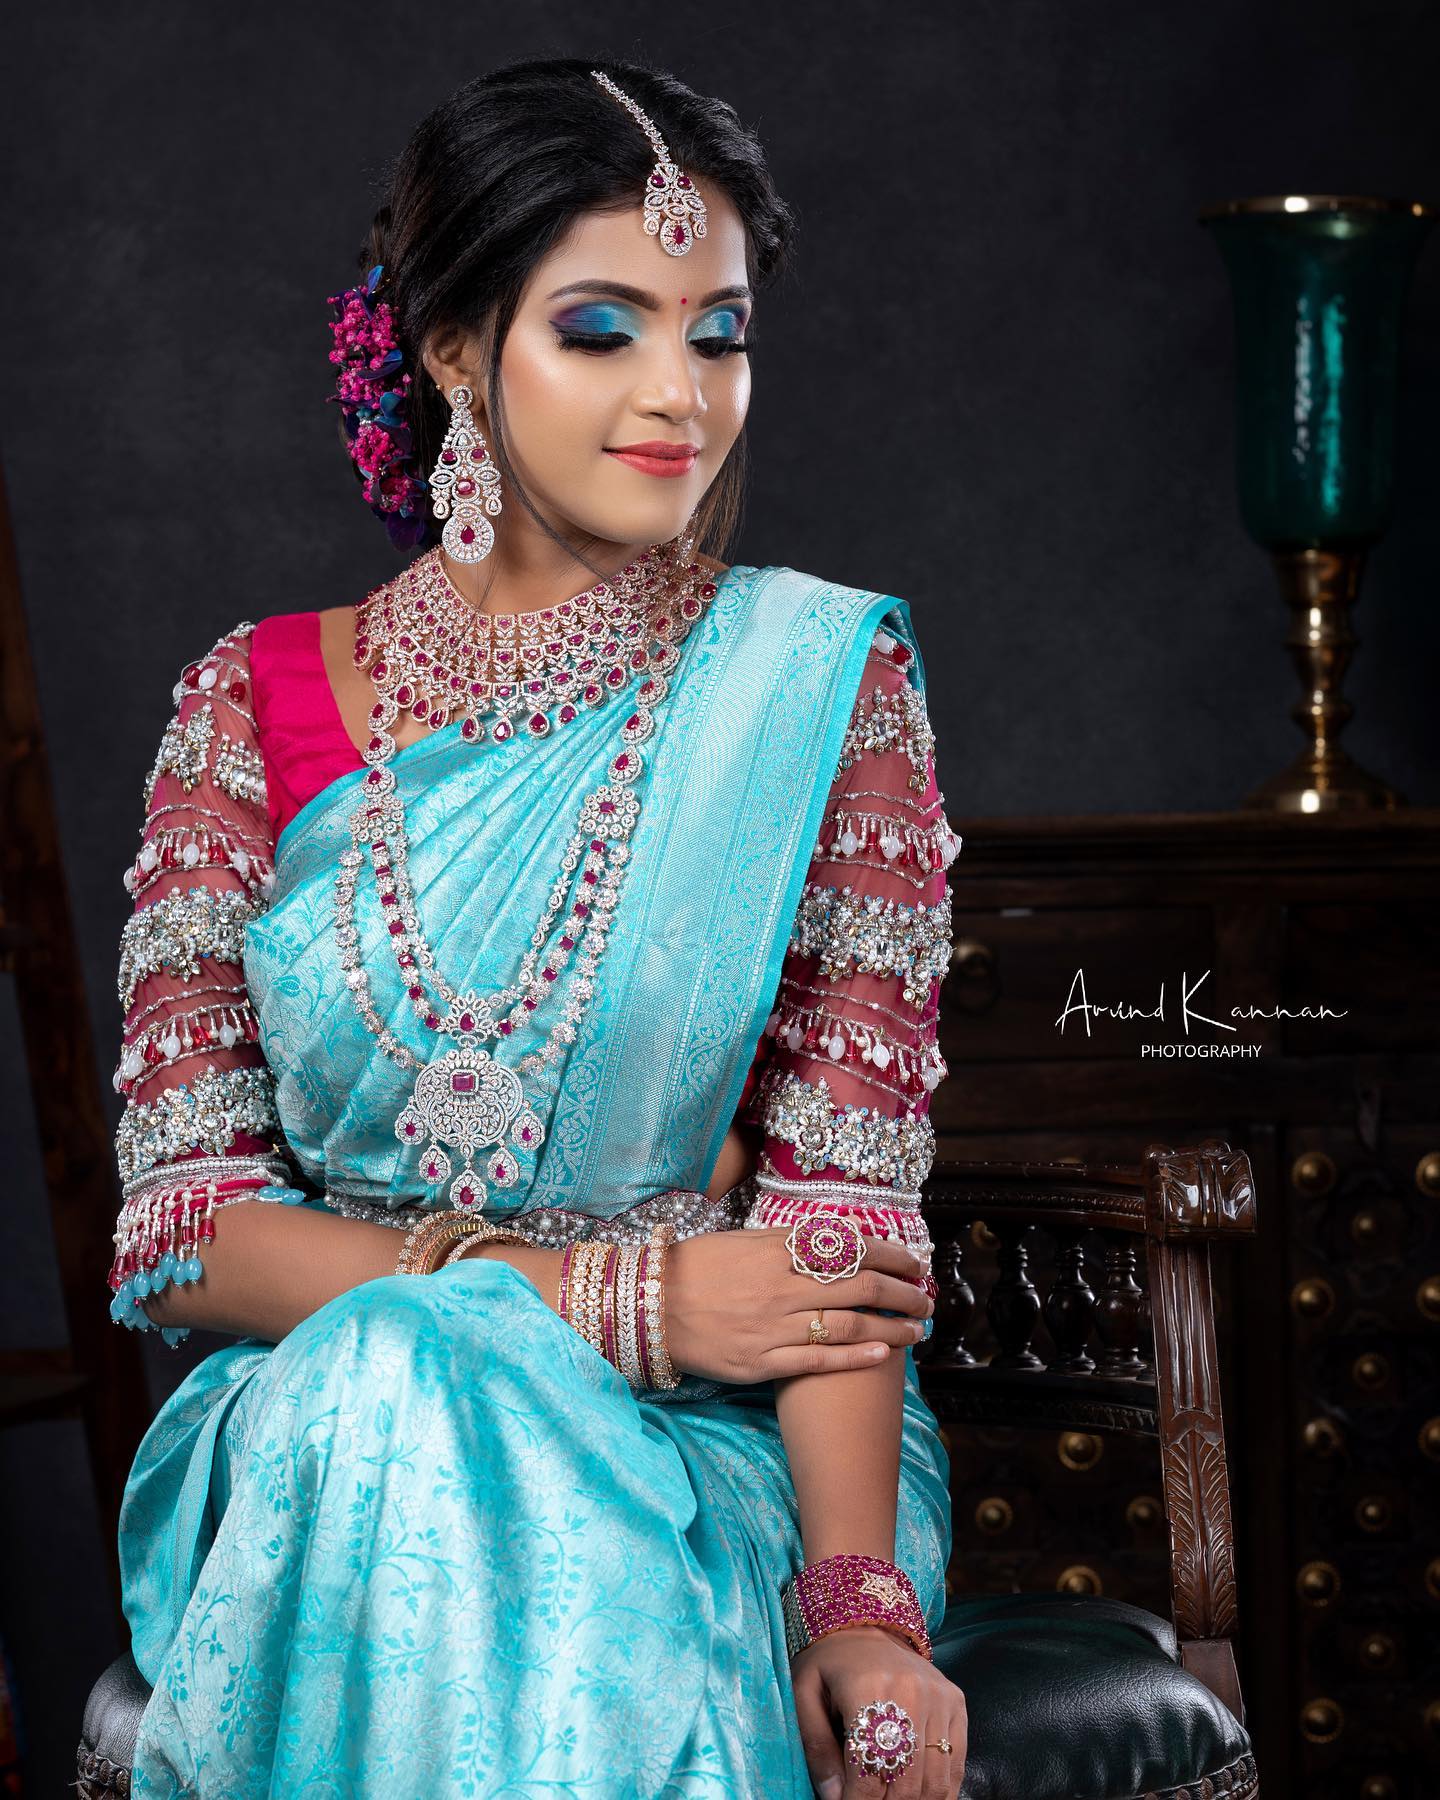 Vaishali Thaniga Gleaming Bridal Look In Ice Blue Silk Saree With Pink Beads Embedded Blouse & Diamond Stone Jewellery Adds More Blings